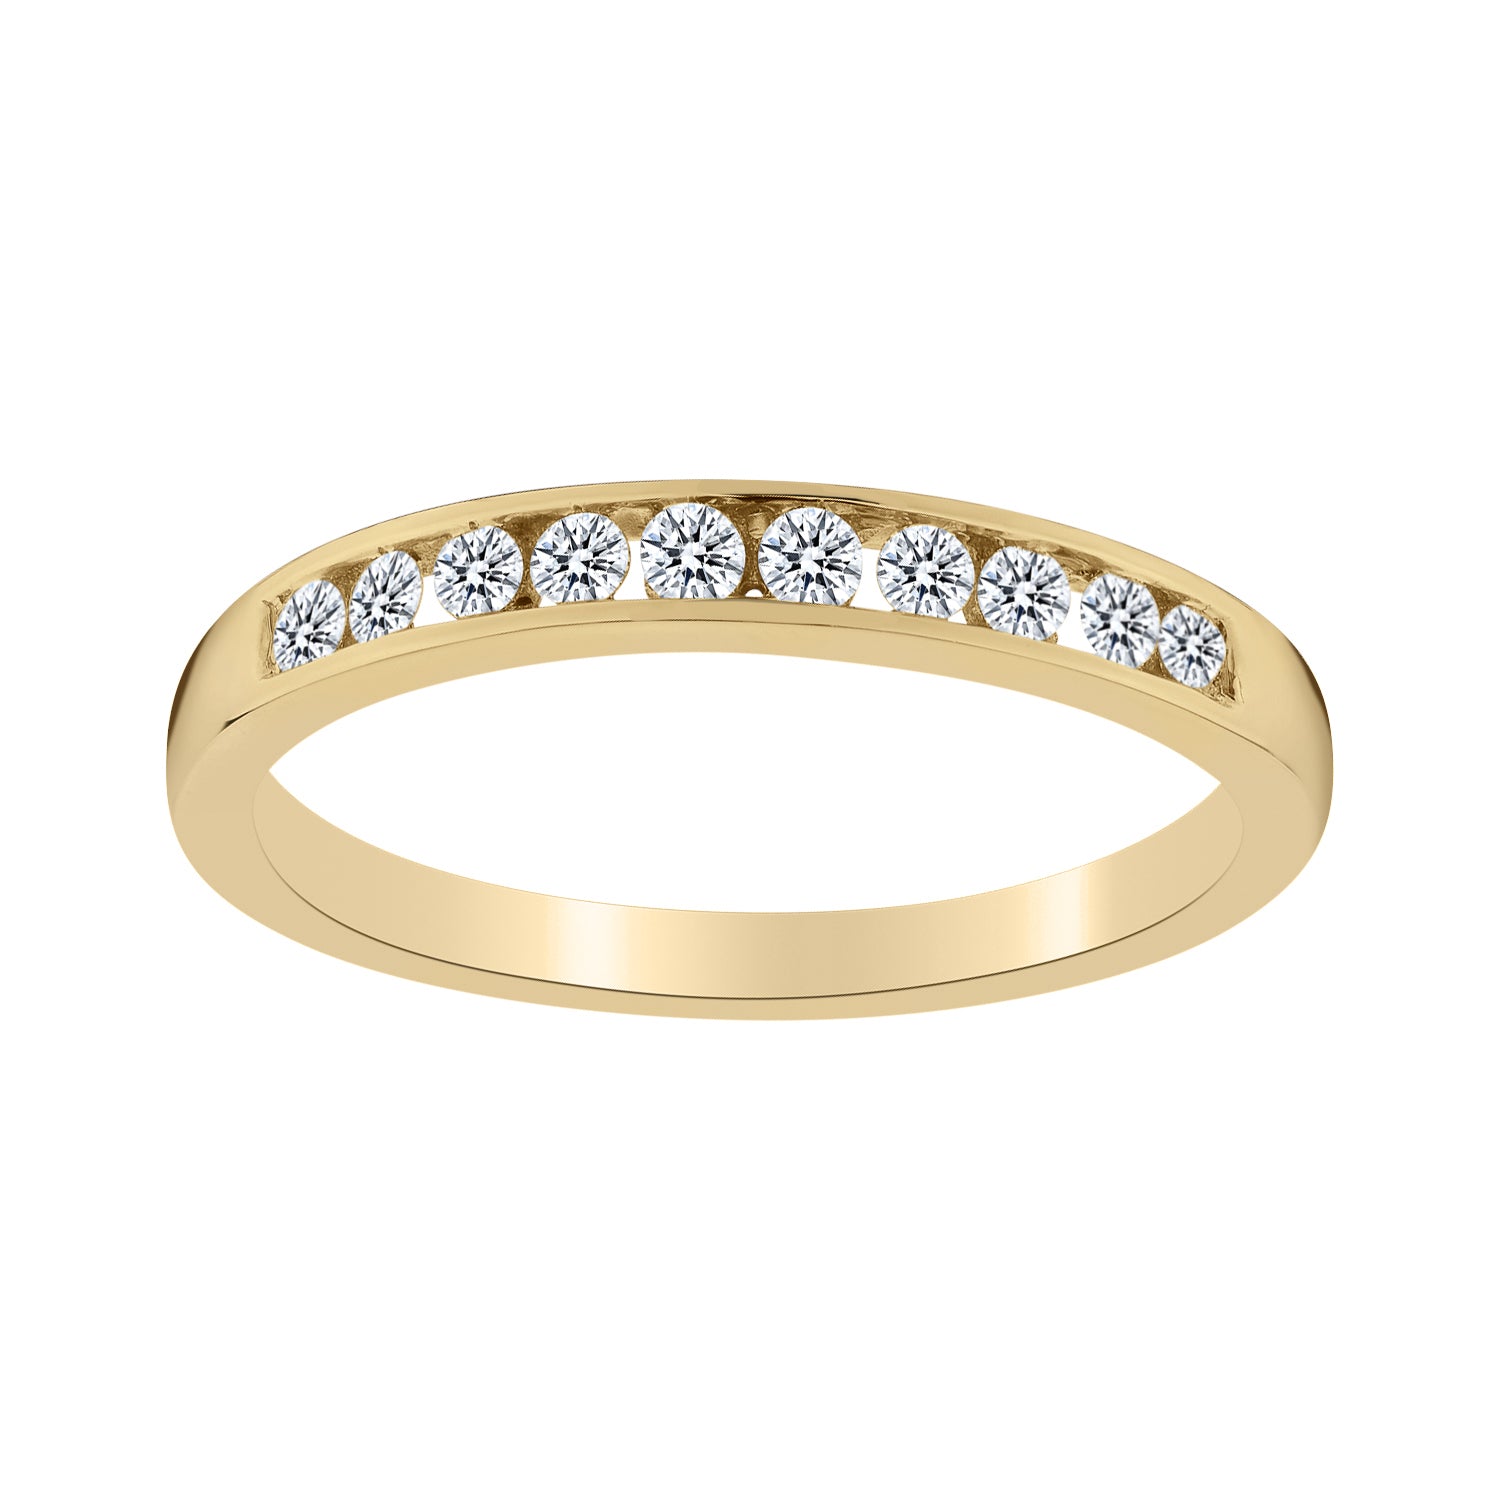 .20 Carat of Diamonds Ring Band, 10kt Yellow Gold…....................NOW